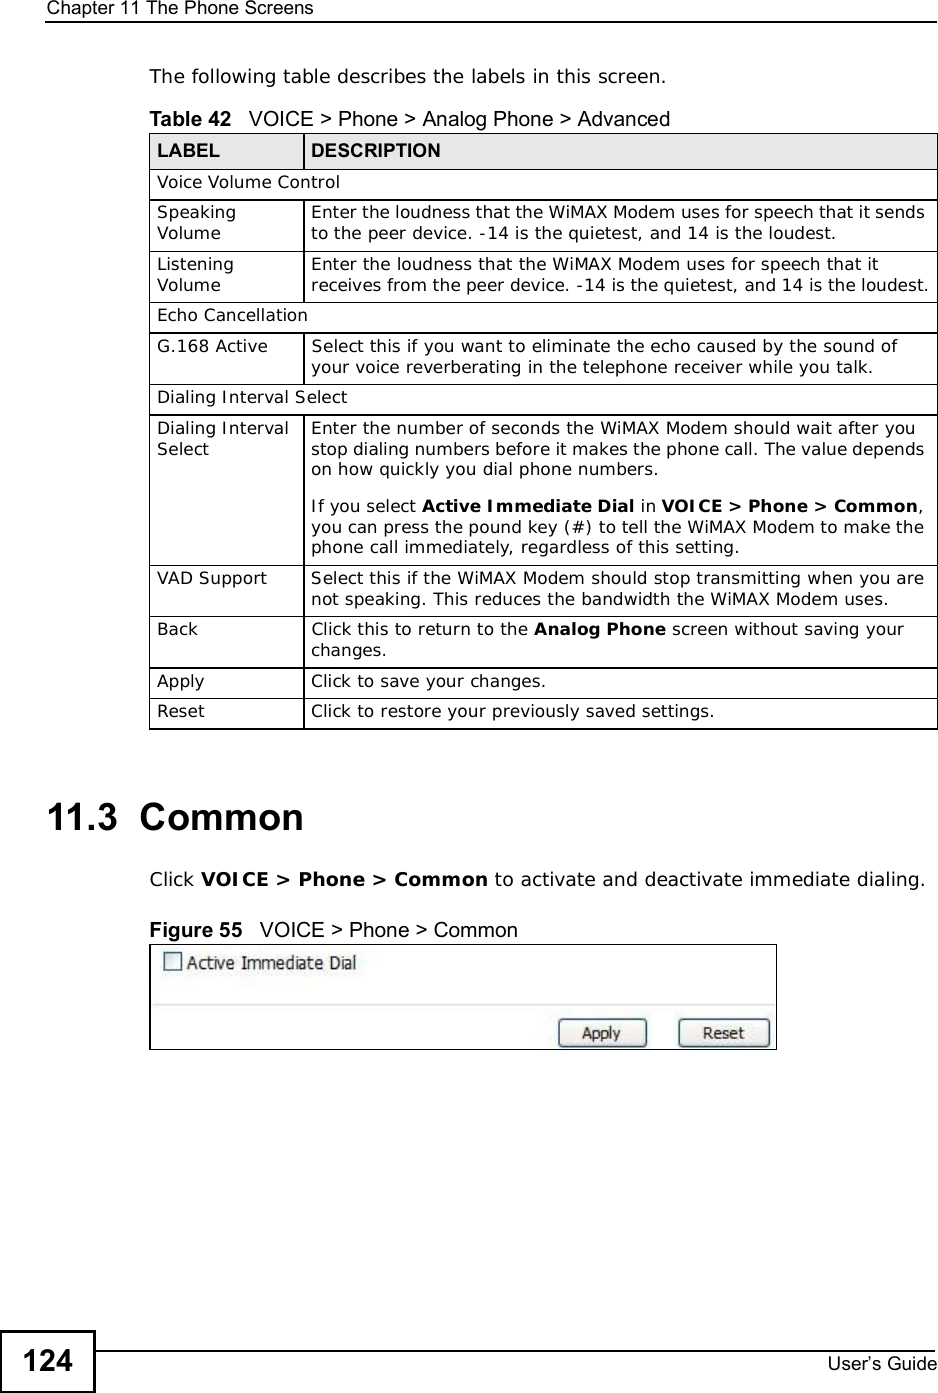 Chapter 11The Phone ScreensUser s Guide124The following table describes the labels in this screen.11.3  CommonClick VOICE &gt; Phone &gt; Common to activate and deactivate immediate dialing.Figure 55   VOICE &gt; Phone &gt; CommonTable 42   VOICE &gt; Phone &gt; Analog Phone &gt; AdvancedLABEL DESCRIPTIONVoice Volume ControlSpeaking Volume Enter the loudness that the WiMAX Modem uses for speech that it sends to the peer device. -14 is the quietest, and 14 is the loudest.ListeningVolume Enter the loudness that the WiMAX Modem uses for speech that it receives from the peer device. -14 is the quietest, and 14 is the loudest.Echo CancellationG.168 ActiveSelect this if you want to eliminate the echo caused by the sound of your voice reverberating in the telephone receiver while you talk.Dialing Interval SelectDialing Interval Select Enter the number of seconds the WiMAX Modem should wait after you stop dialing numbers before it makes the phone call. The value depends on how quickly you dial phone numbers.If you select Active Immediate Dial in VOICE &gt; Phone &gt; Common,you can press the pound key (#) to tell the WiMAX Modem to make the phone call immediately, regardless of this setting.VAD SupportSelect this if the WiMAX Modem should stop transmitting when you are not speaking. This reduces the bandwidth the WiMAX Modem uses.BackClick this to return to the Analog Phone screen without saving your changes.Apply Click to save your changes.Reset Click to restore your previously saved settings.